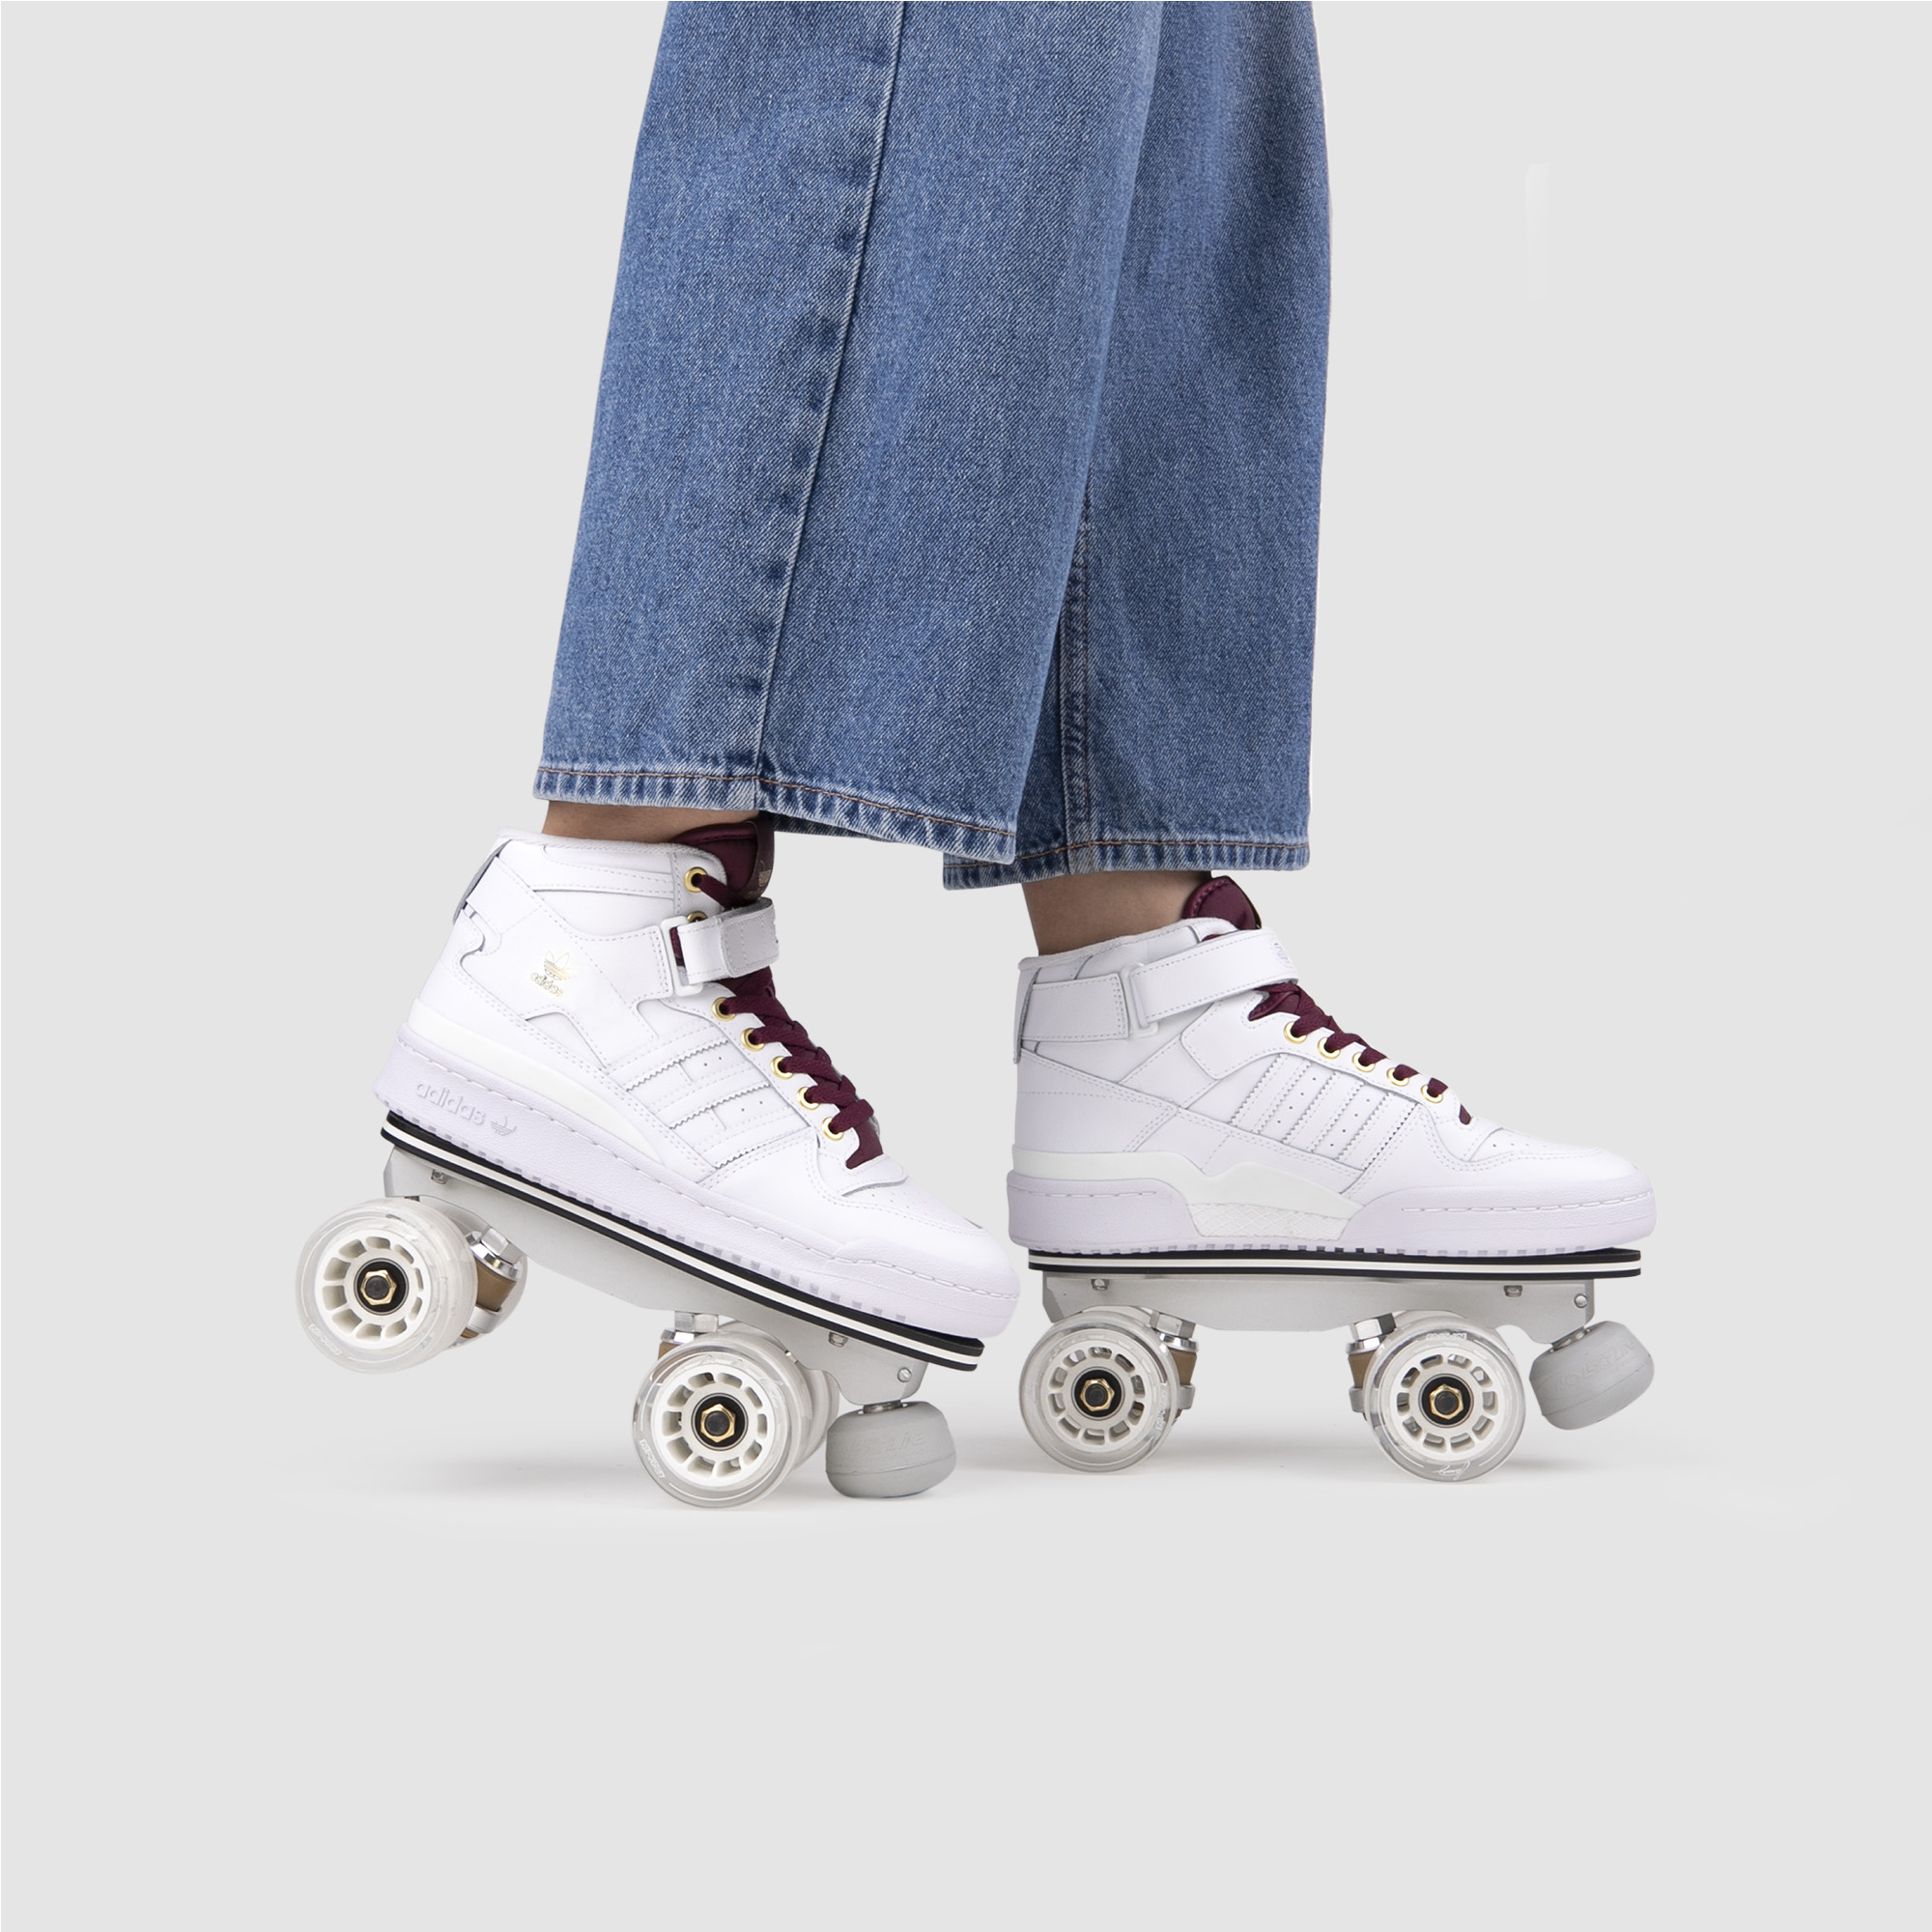 Introducir 61+ imagen roller skates that you attach to your shoes